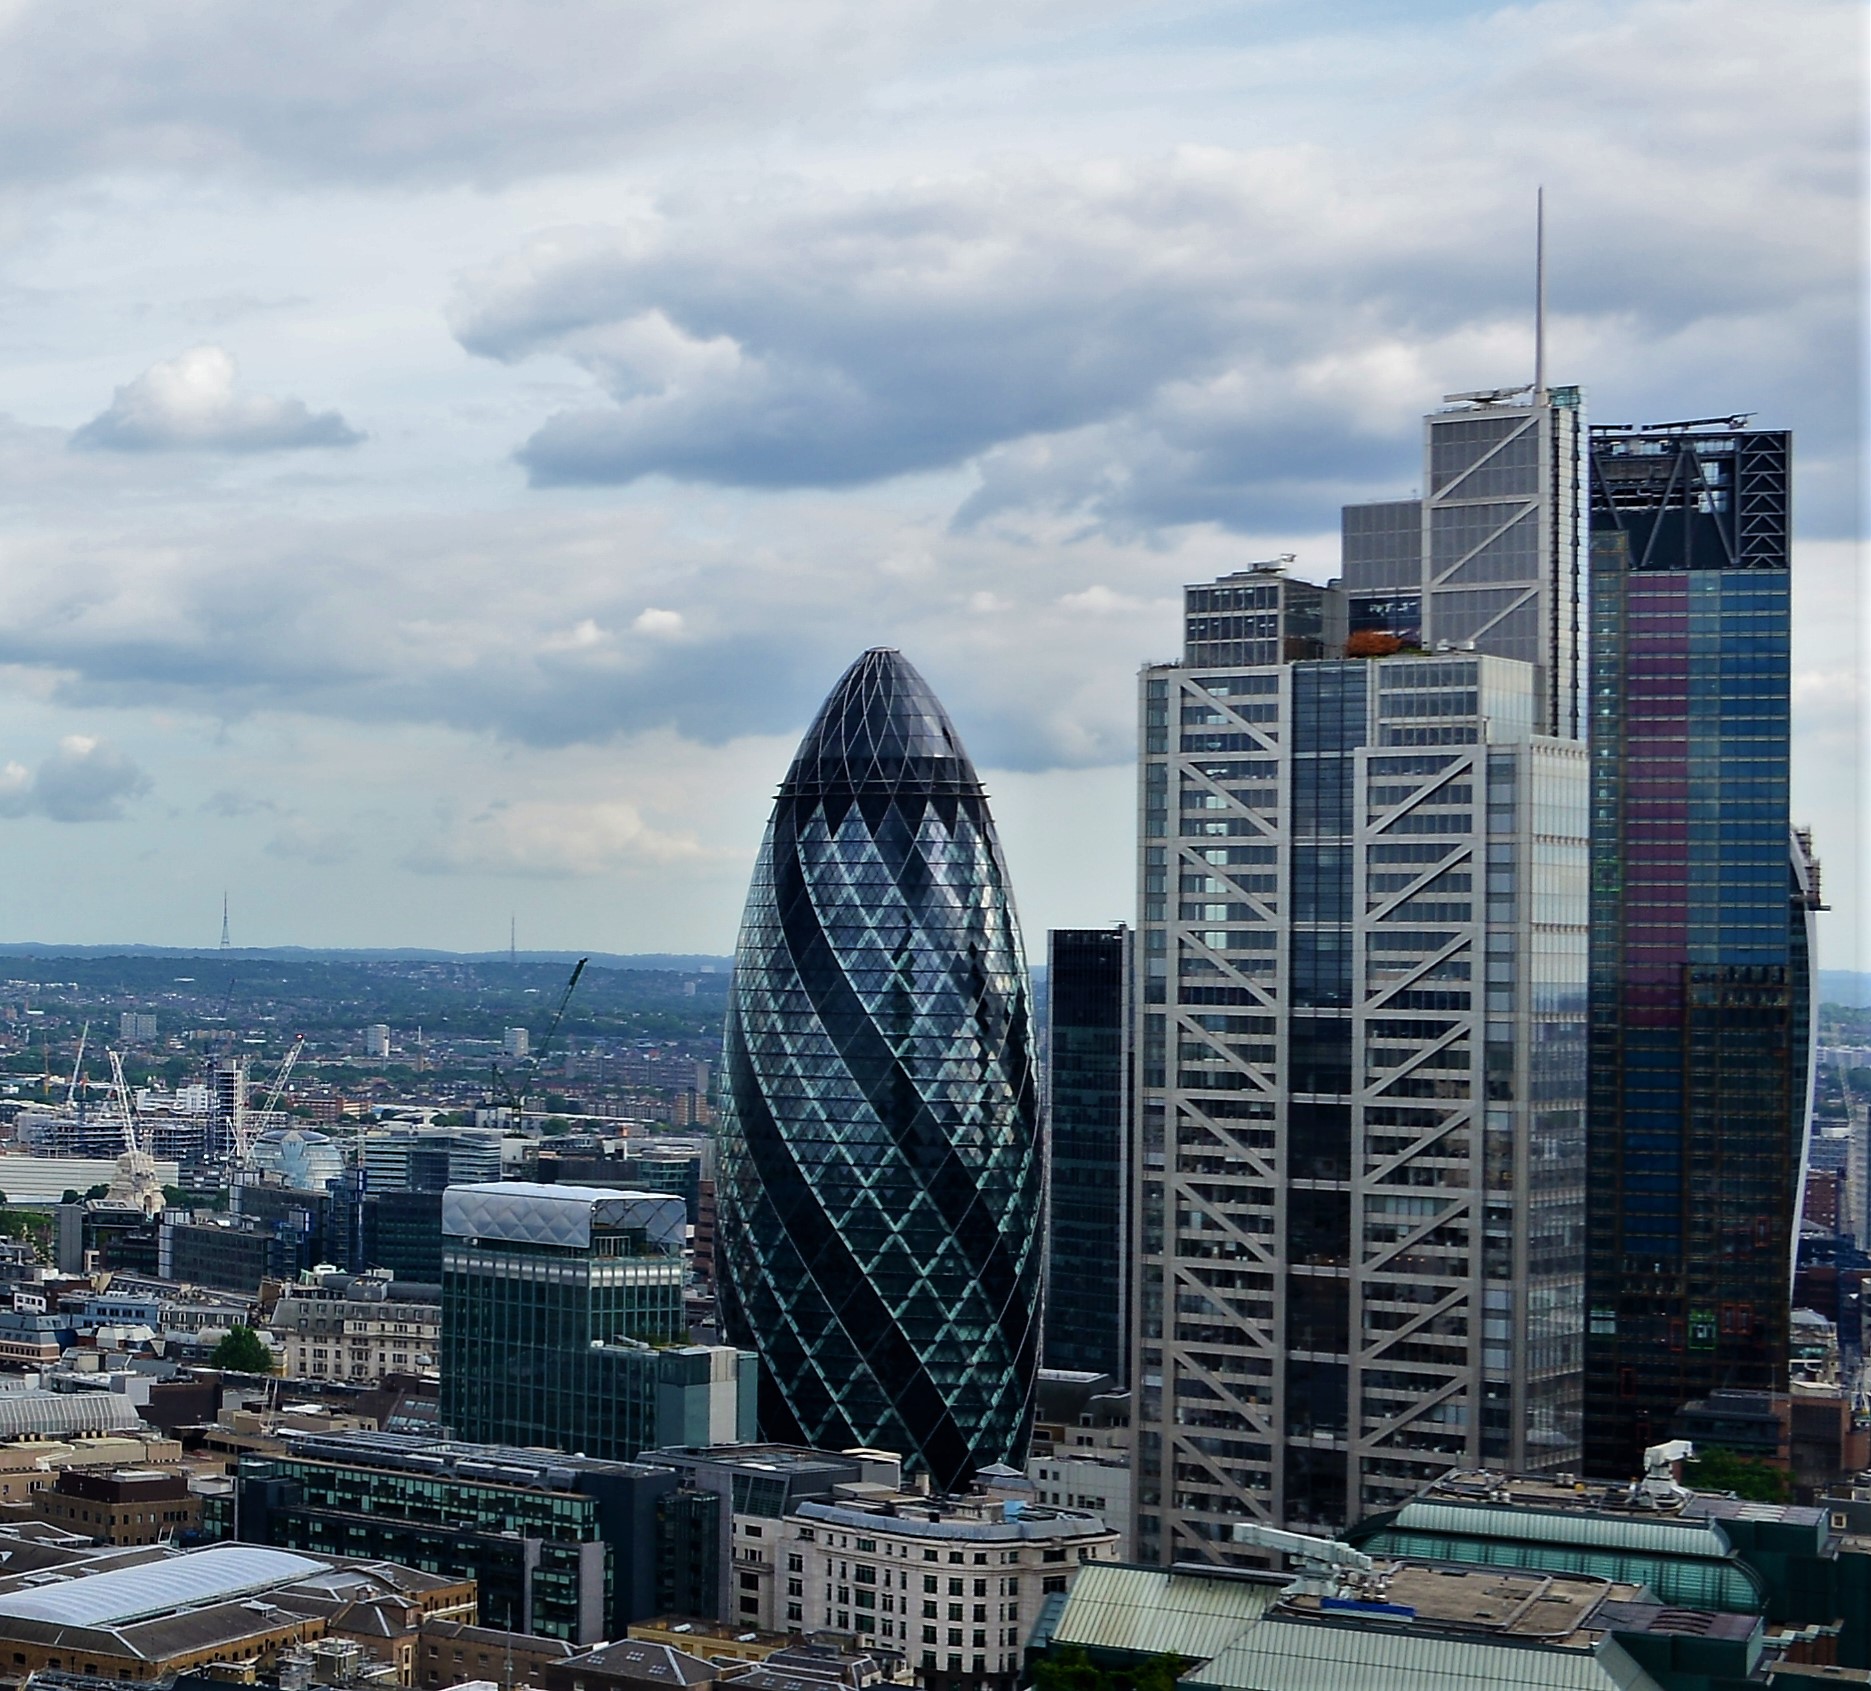 The gherkin st mary axe drone aerial photography company for architects london city